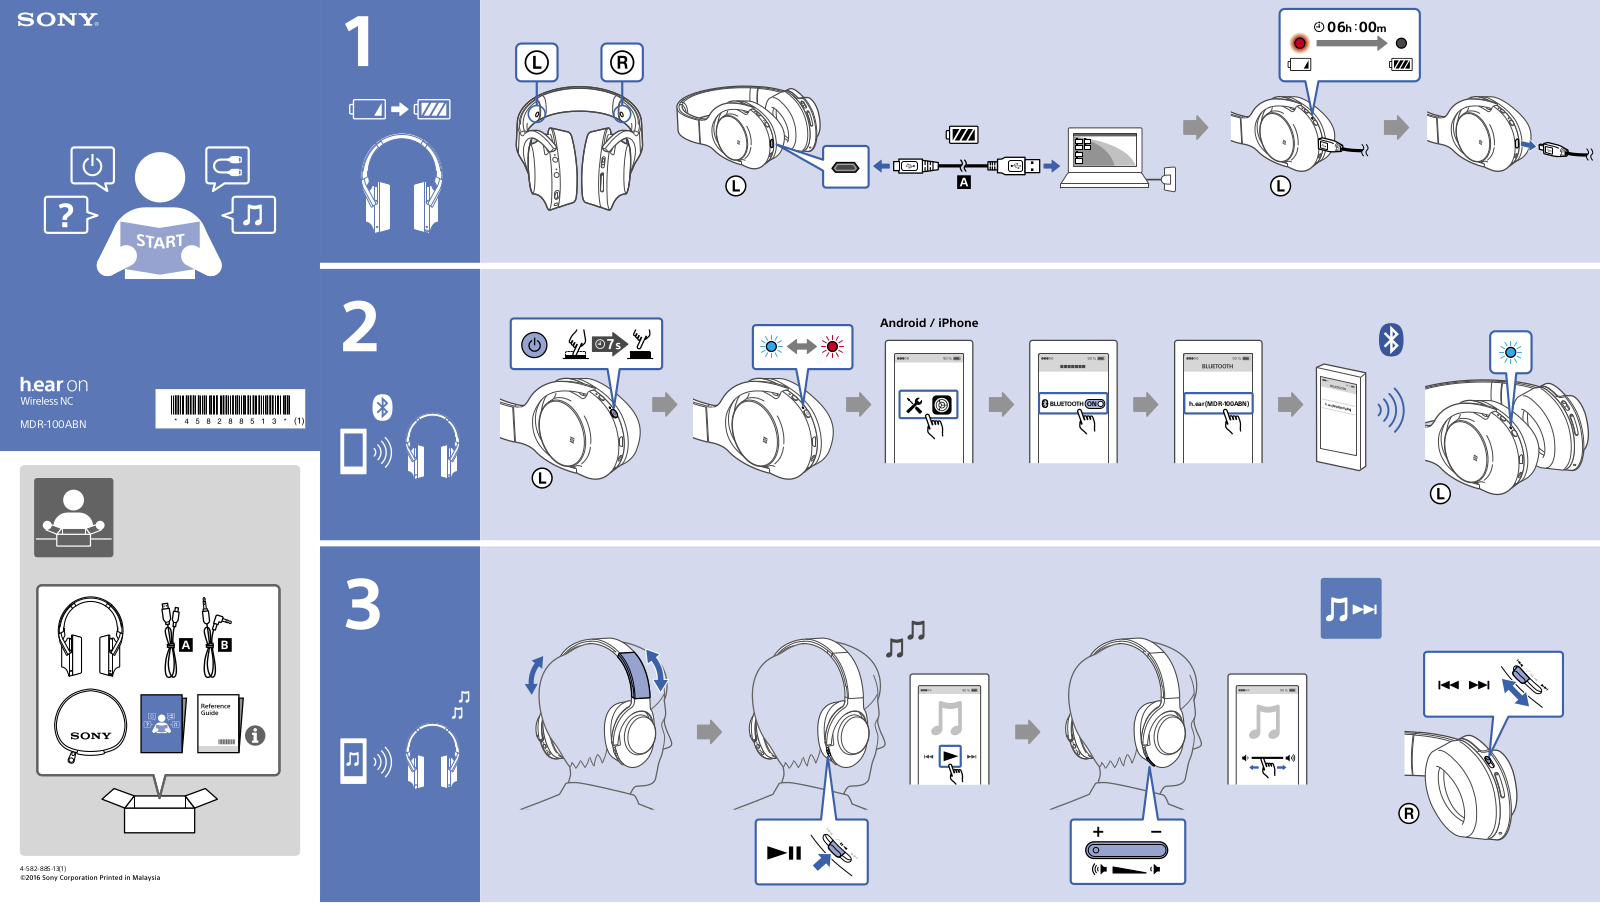 Sony MDR100ABNP, MDR100ABNL Specifications Sheet